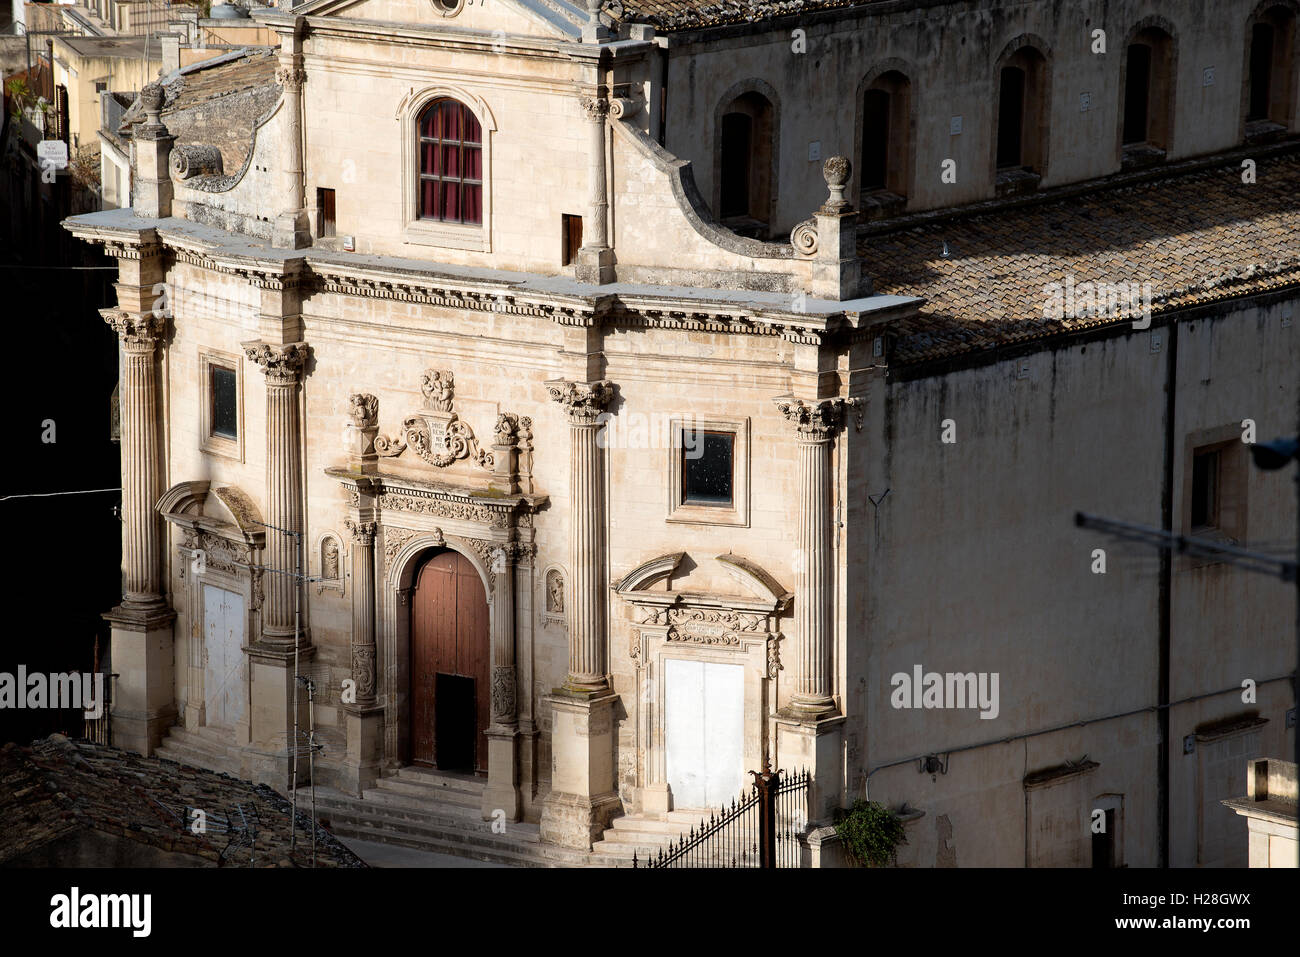 The hilltop town Ragusa Ibla in Sicily world heritage Stock Photo